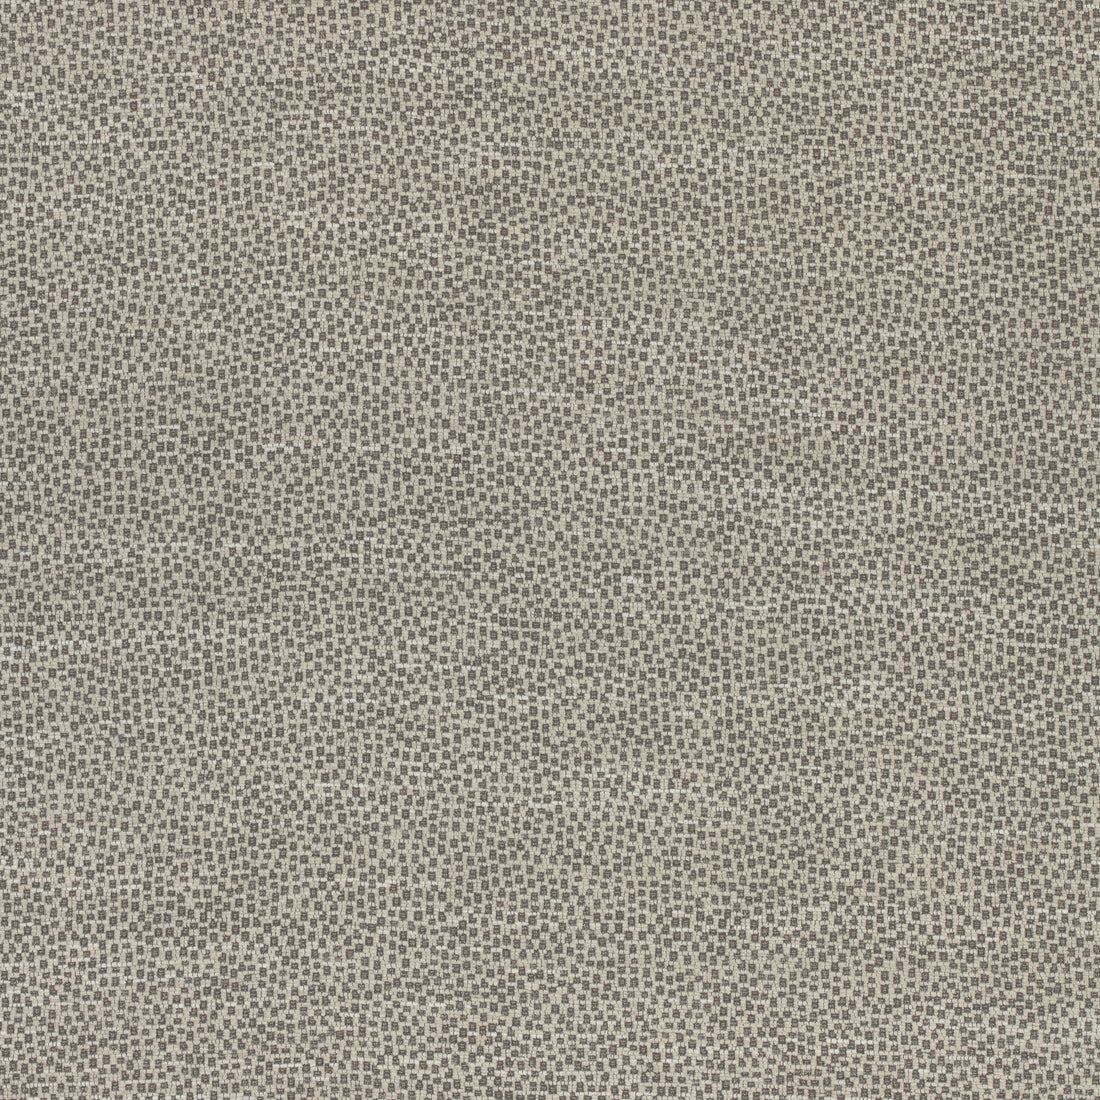 Nala fabric in stone color - pattern number W74077 - by Thibaut in the Cadence collection